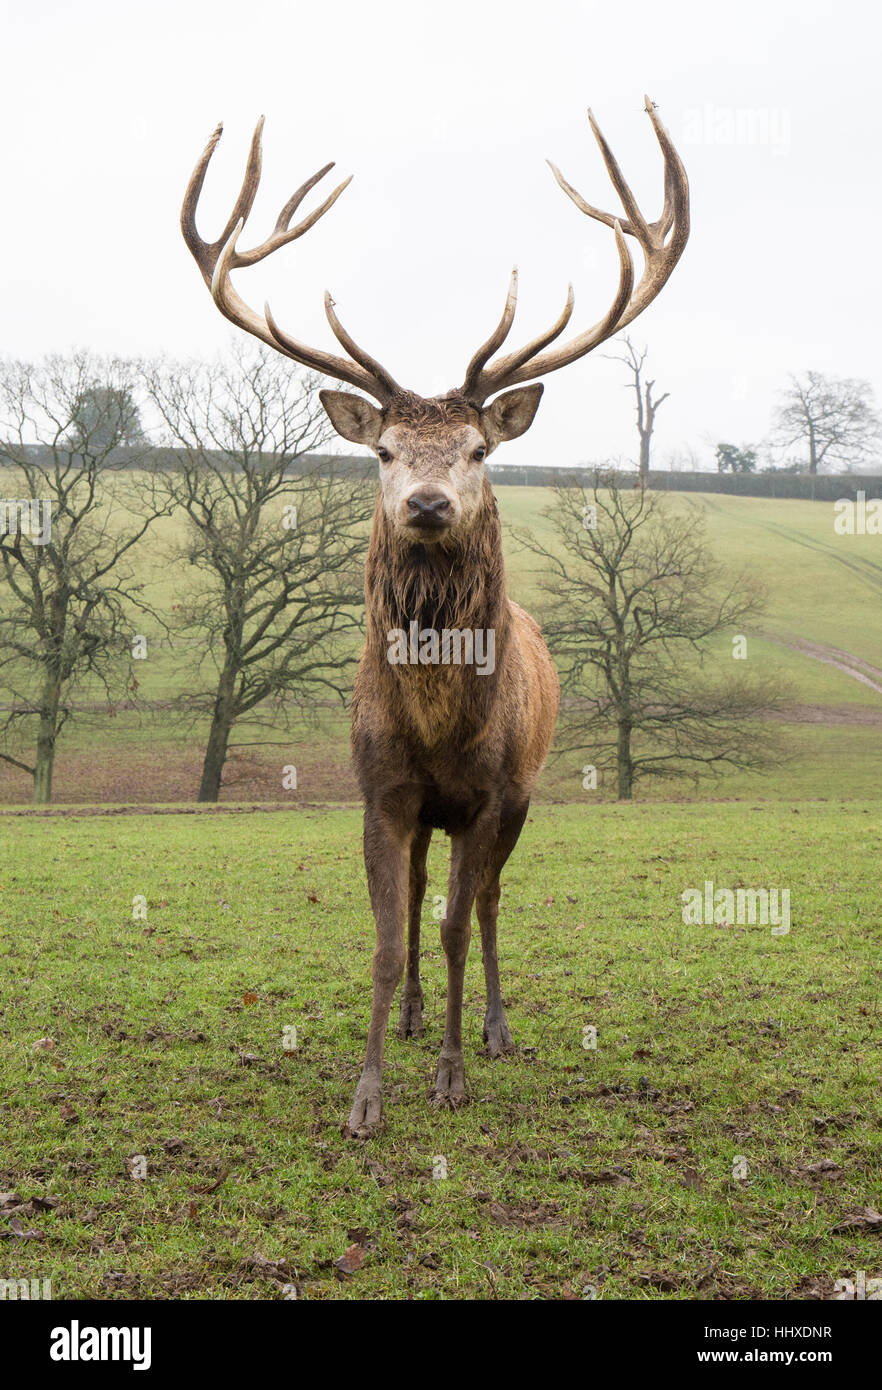 Red deer stag standing in field in front of trees looking at camera Stock Photo